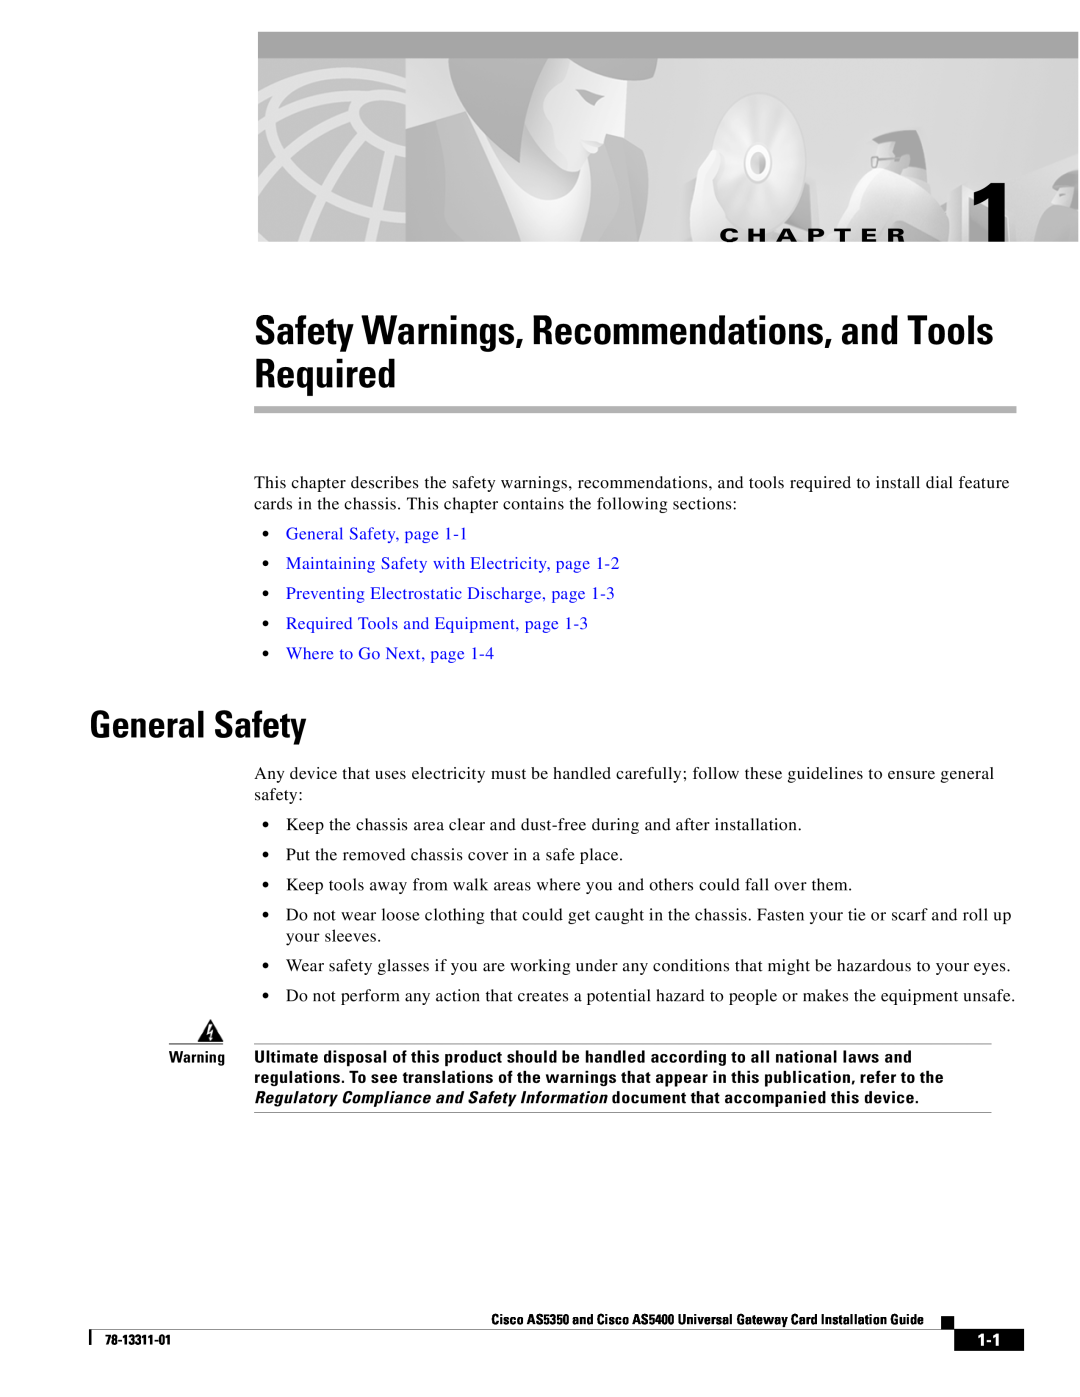 Cisco Systems AS5350, AS5400 manual Safety Warnings, Recommendations, and Tools Required, General Safety, C H A P T E R 